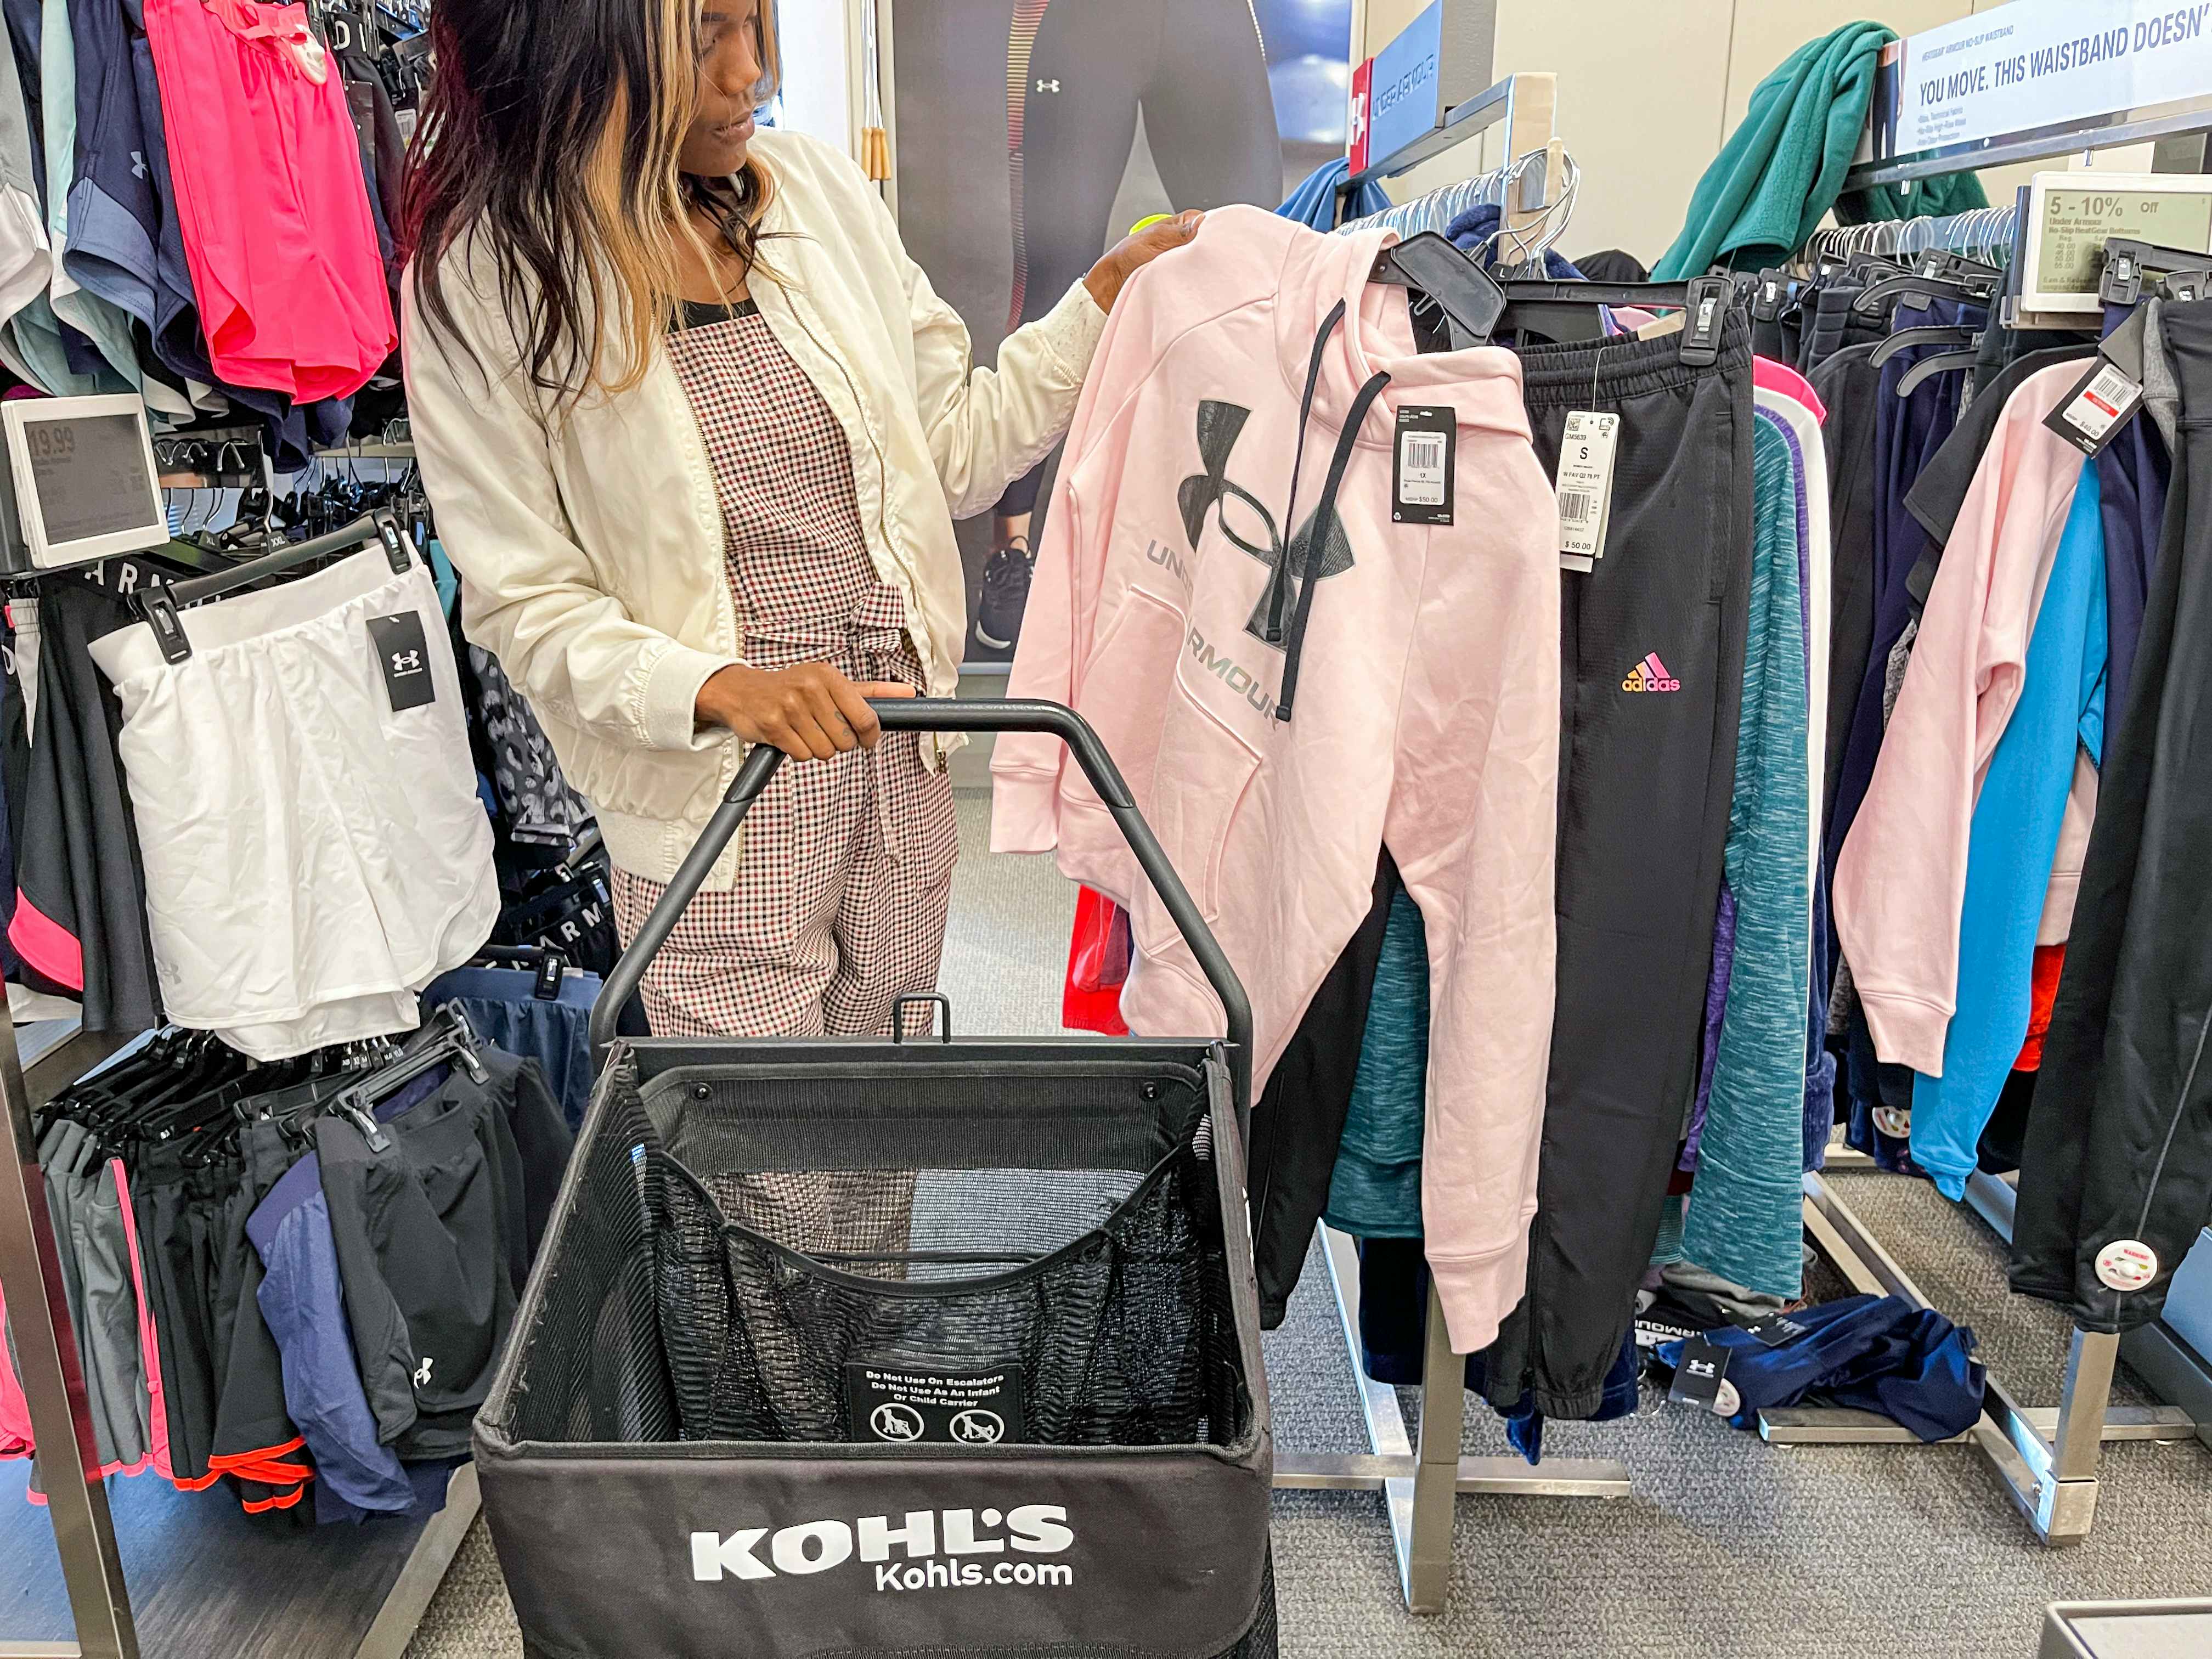 KOHL'S UP TO 85% * OFF SALE! STORE WALKTHROUGH JUNE 2020 